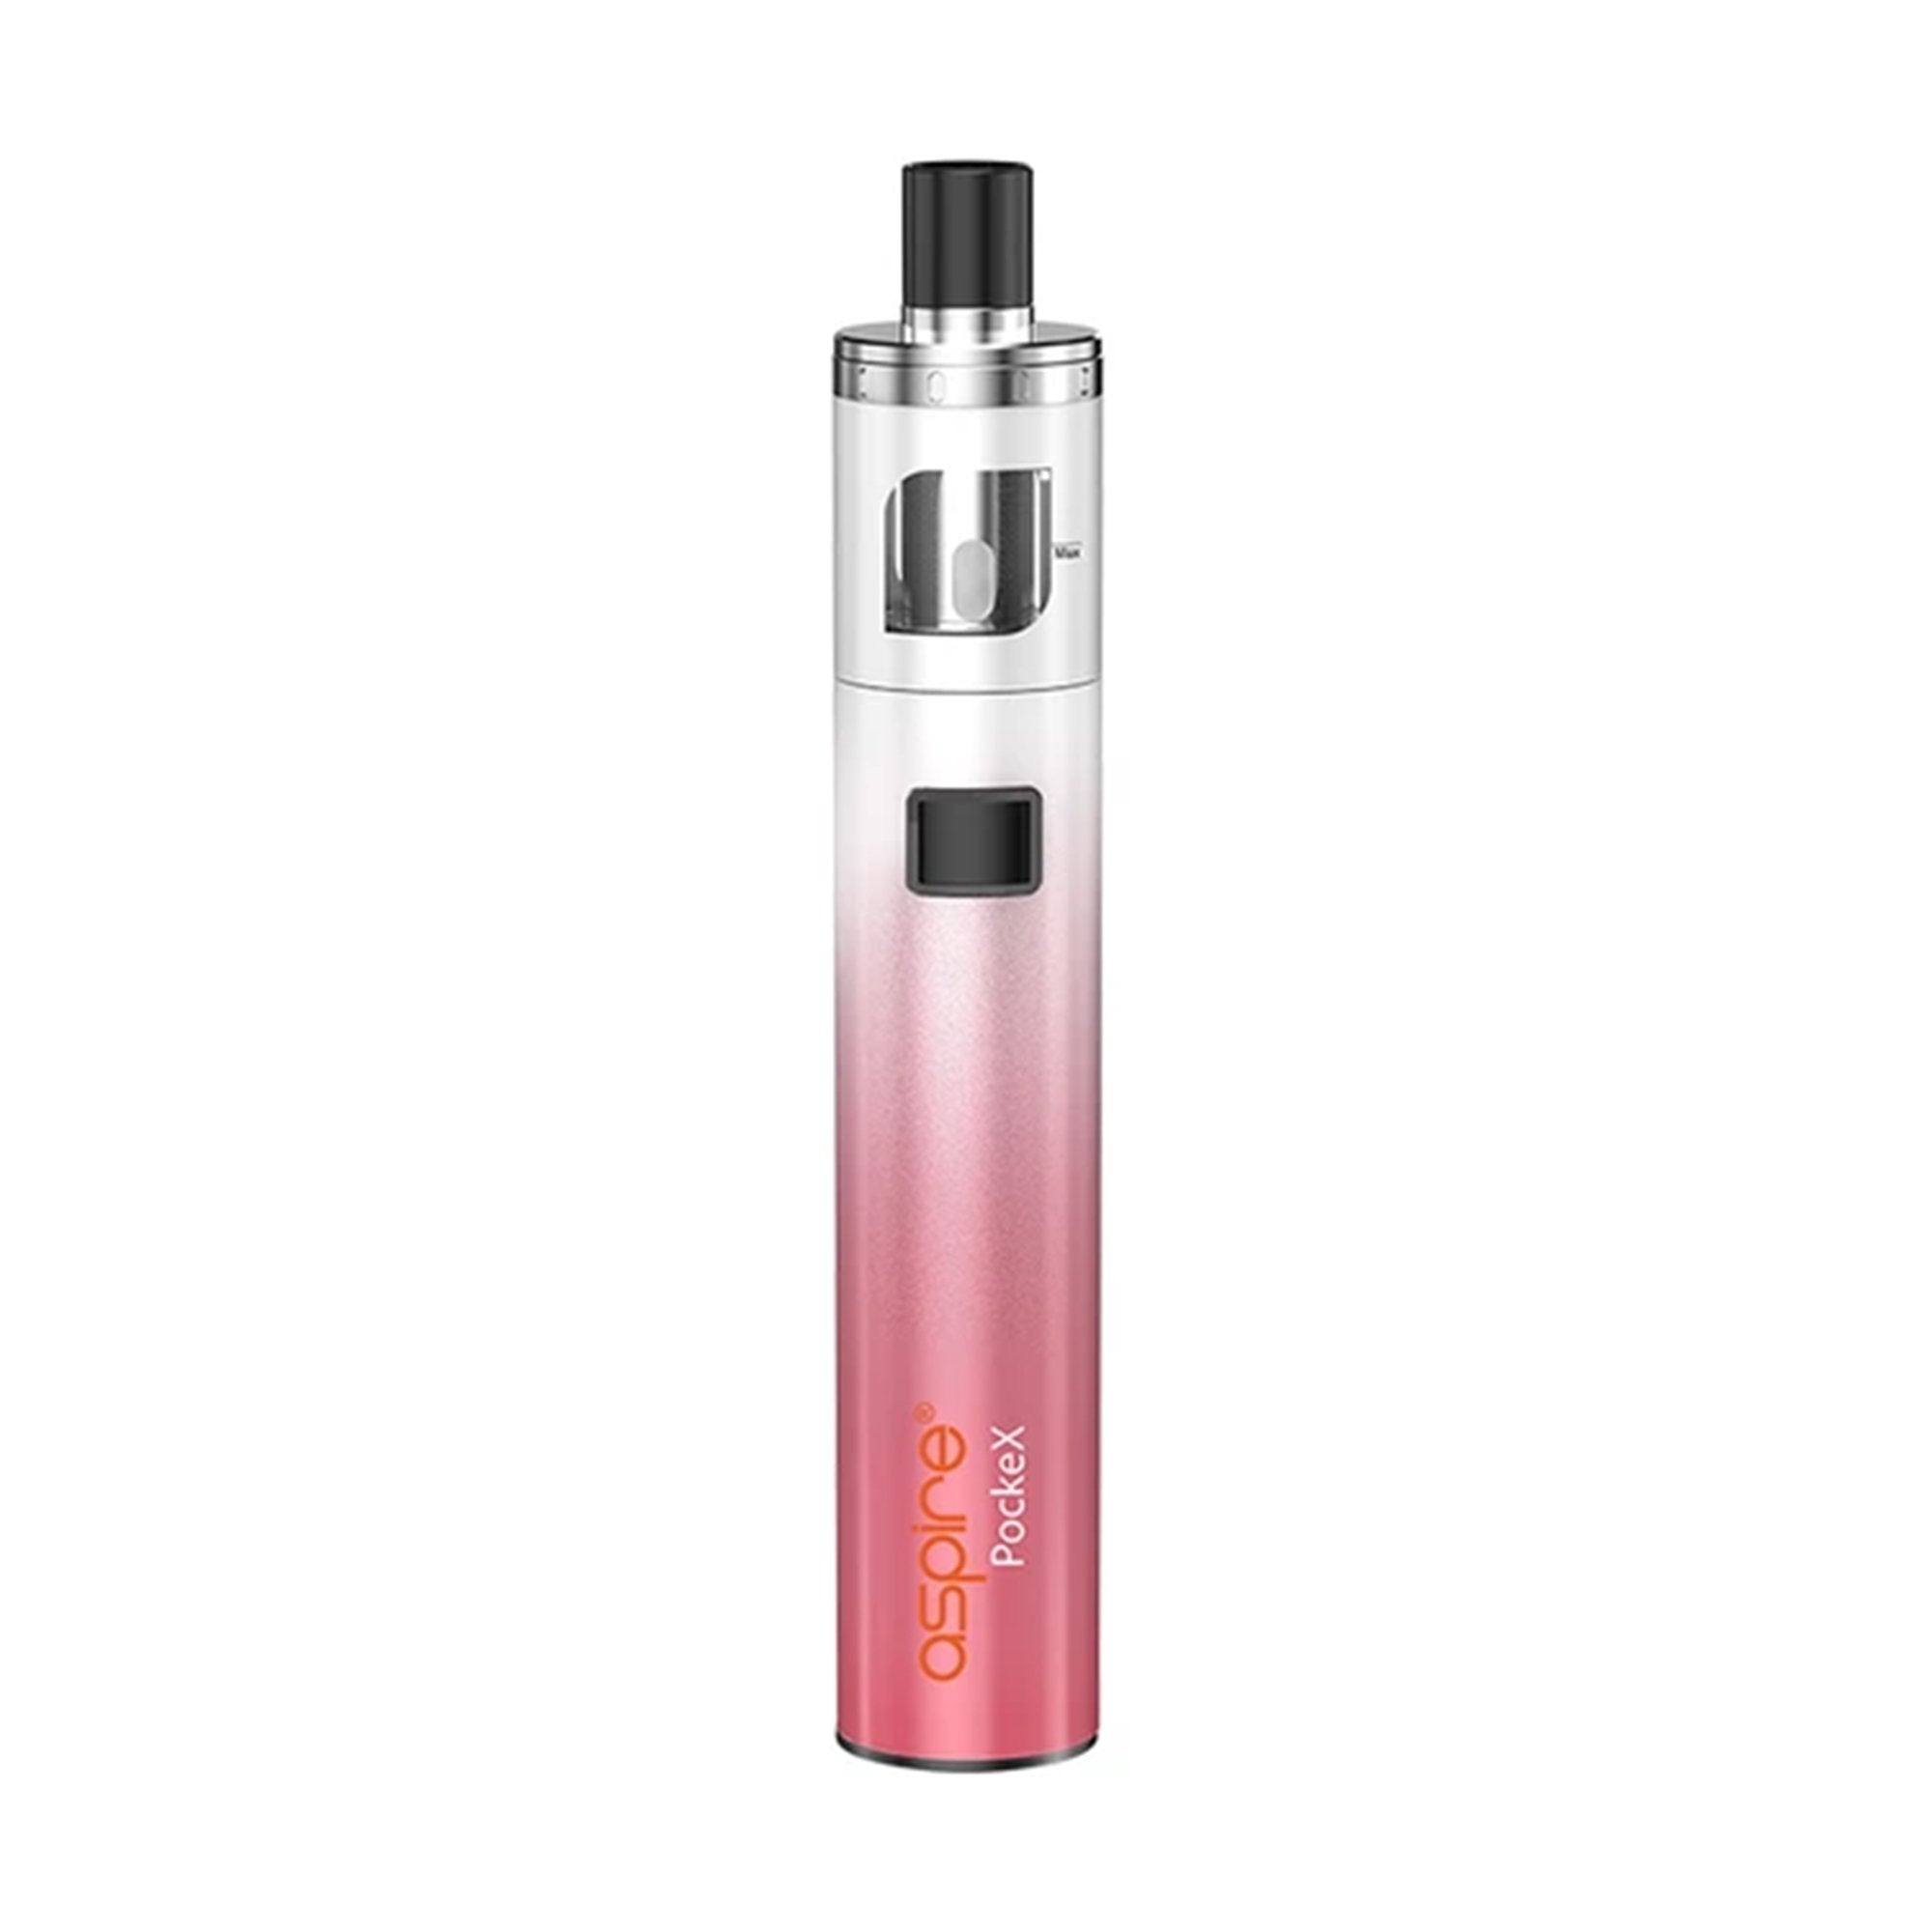 Aspire | PockeX AIO Kit | Wolfvapes - Wolfvapes.co.uk-Pink Gradient